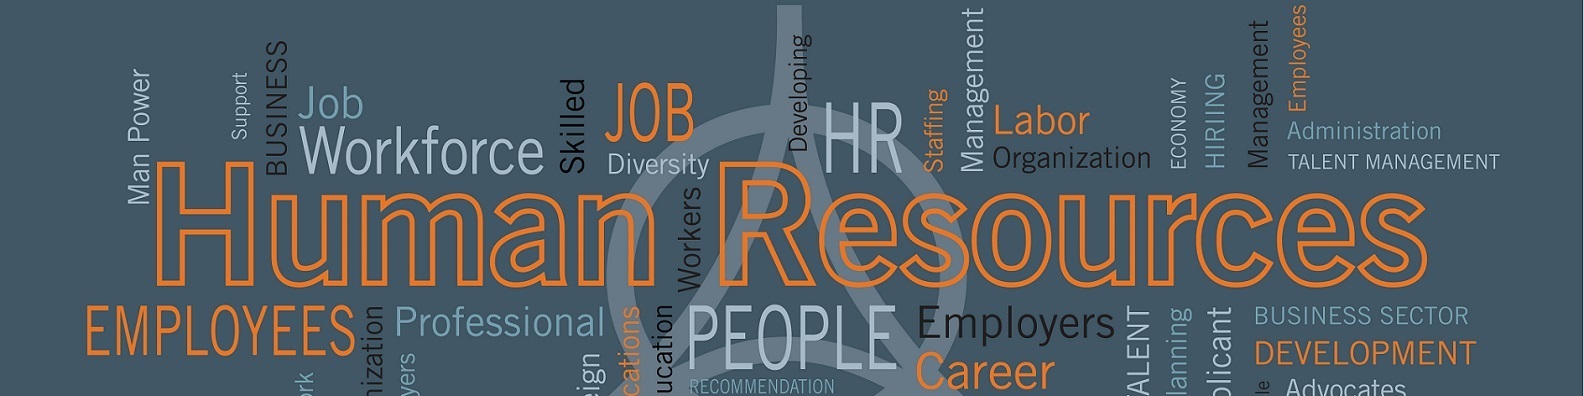 Human Resources Linkedin Background 1584px396